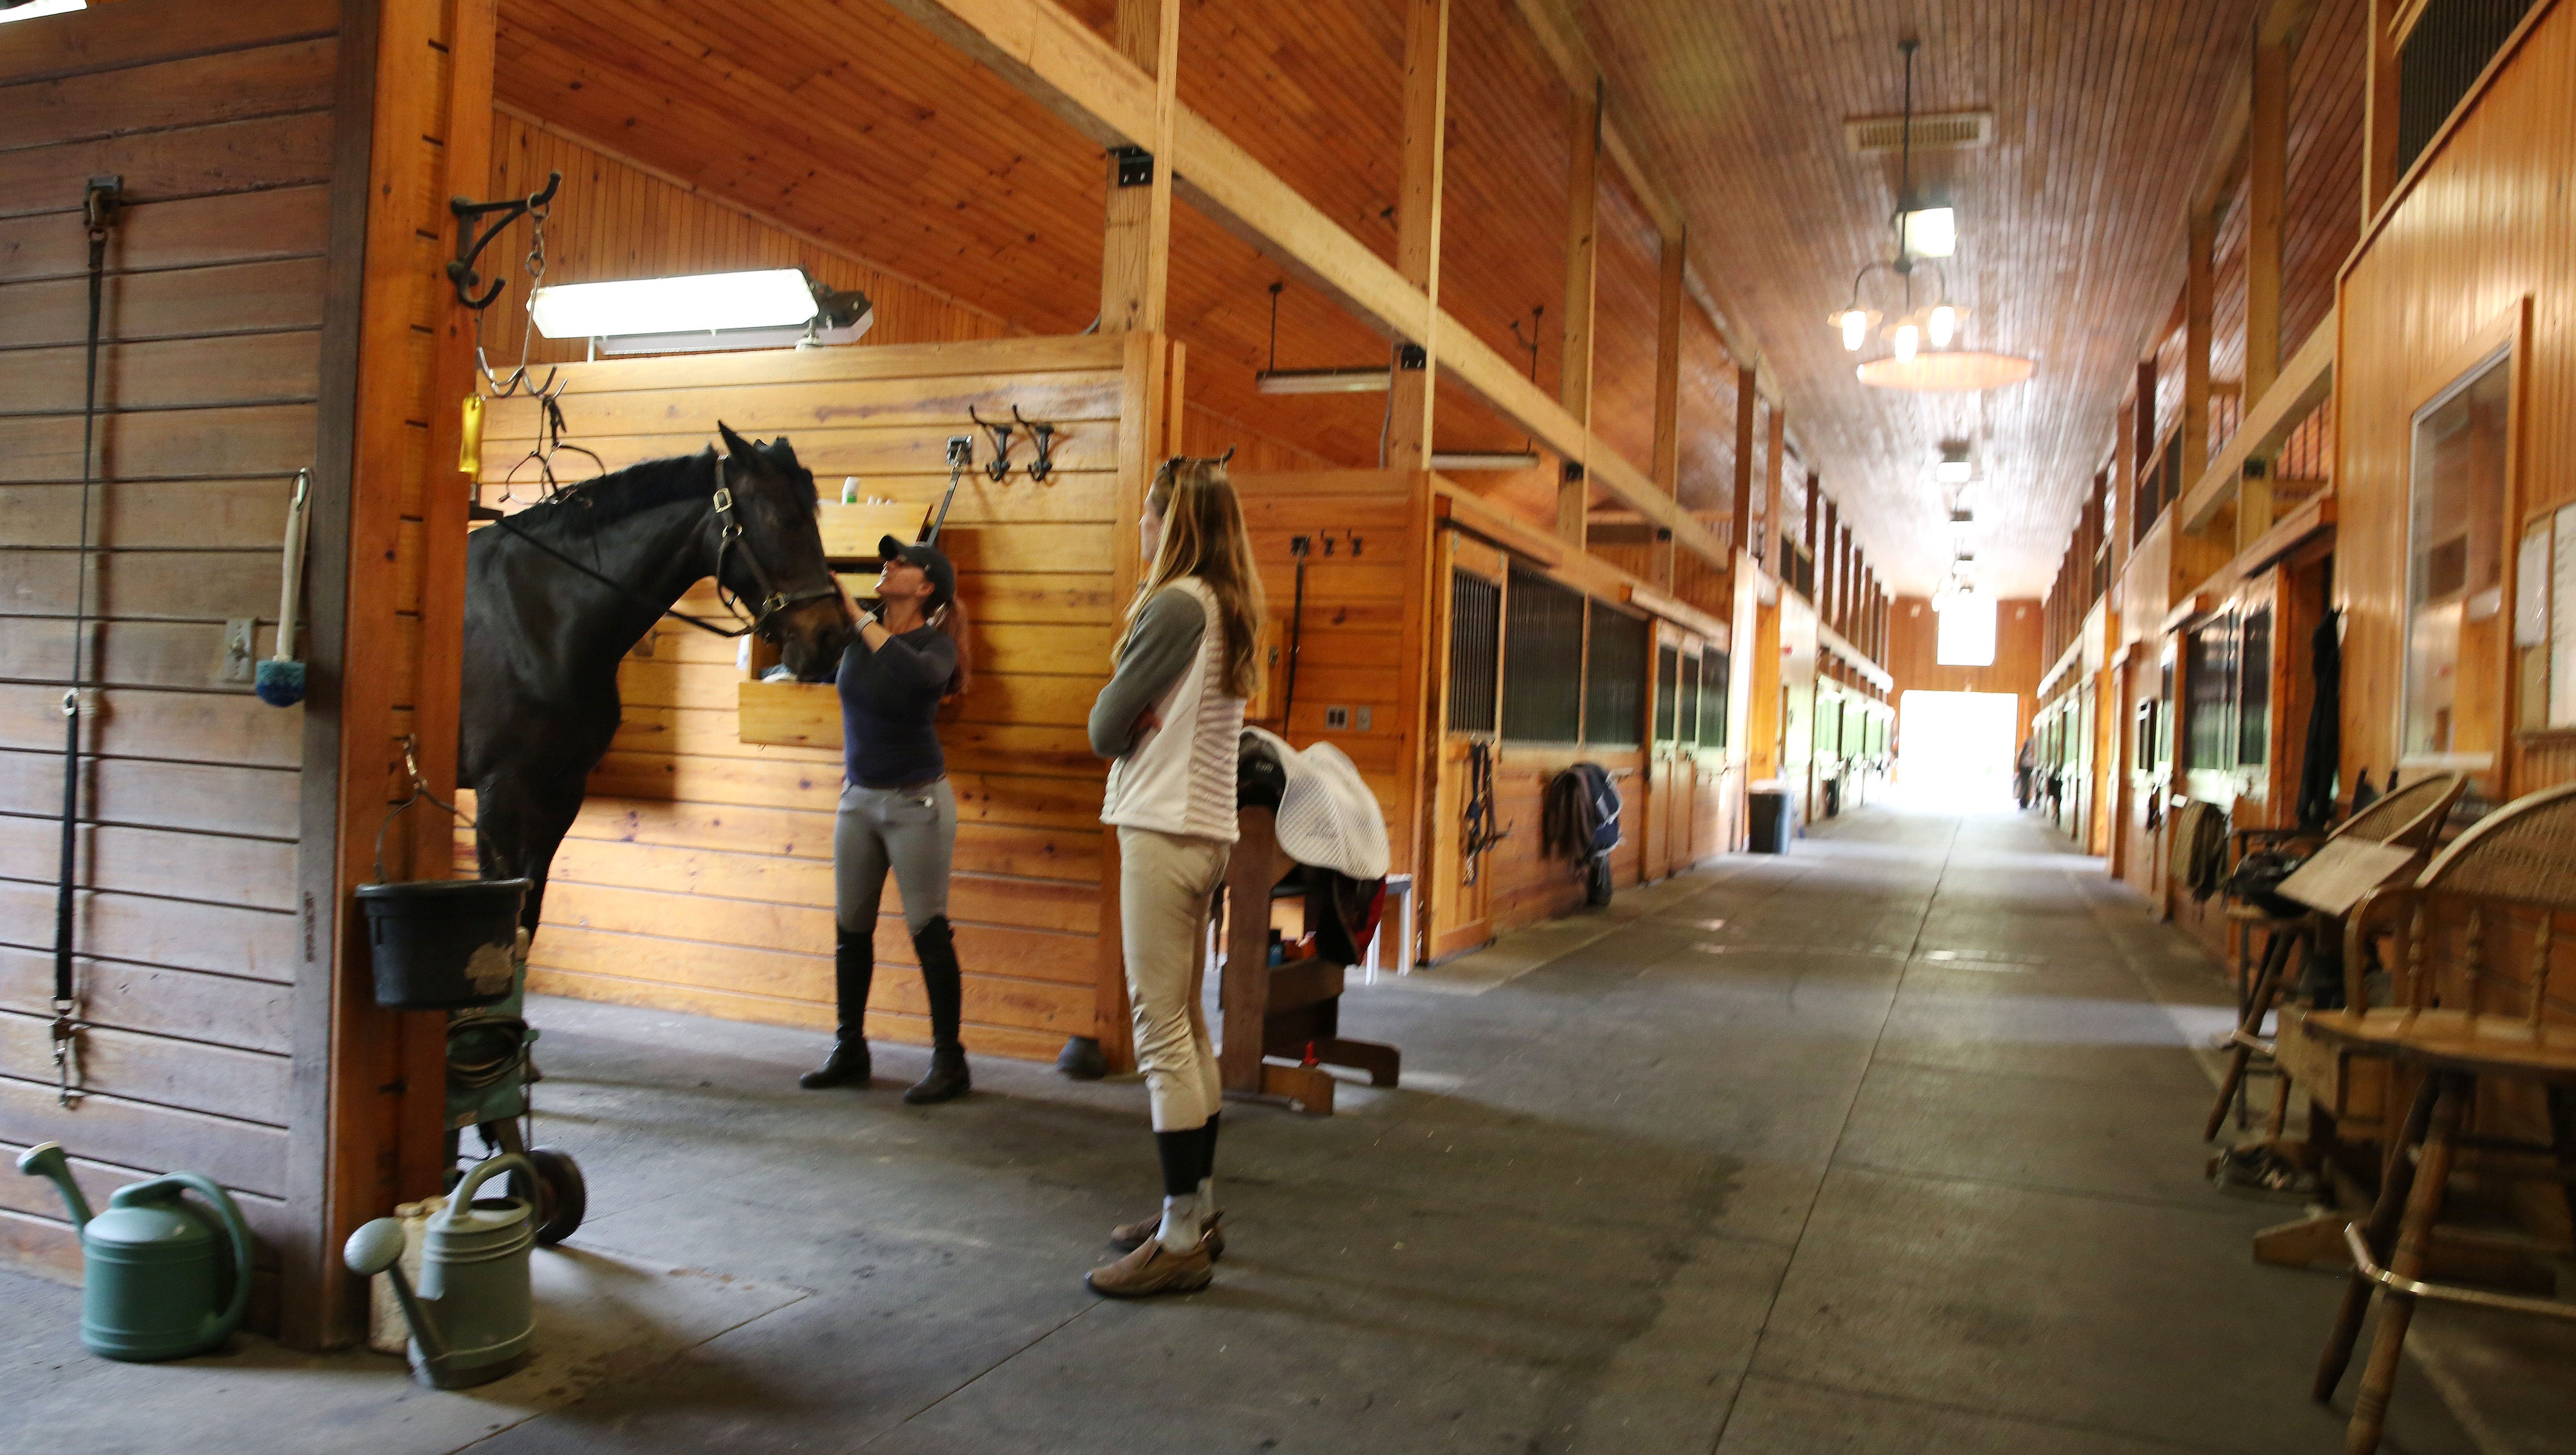 Finding Horse Stall Rentals